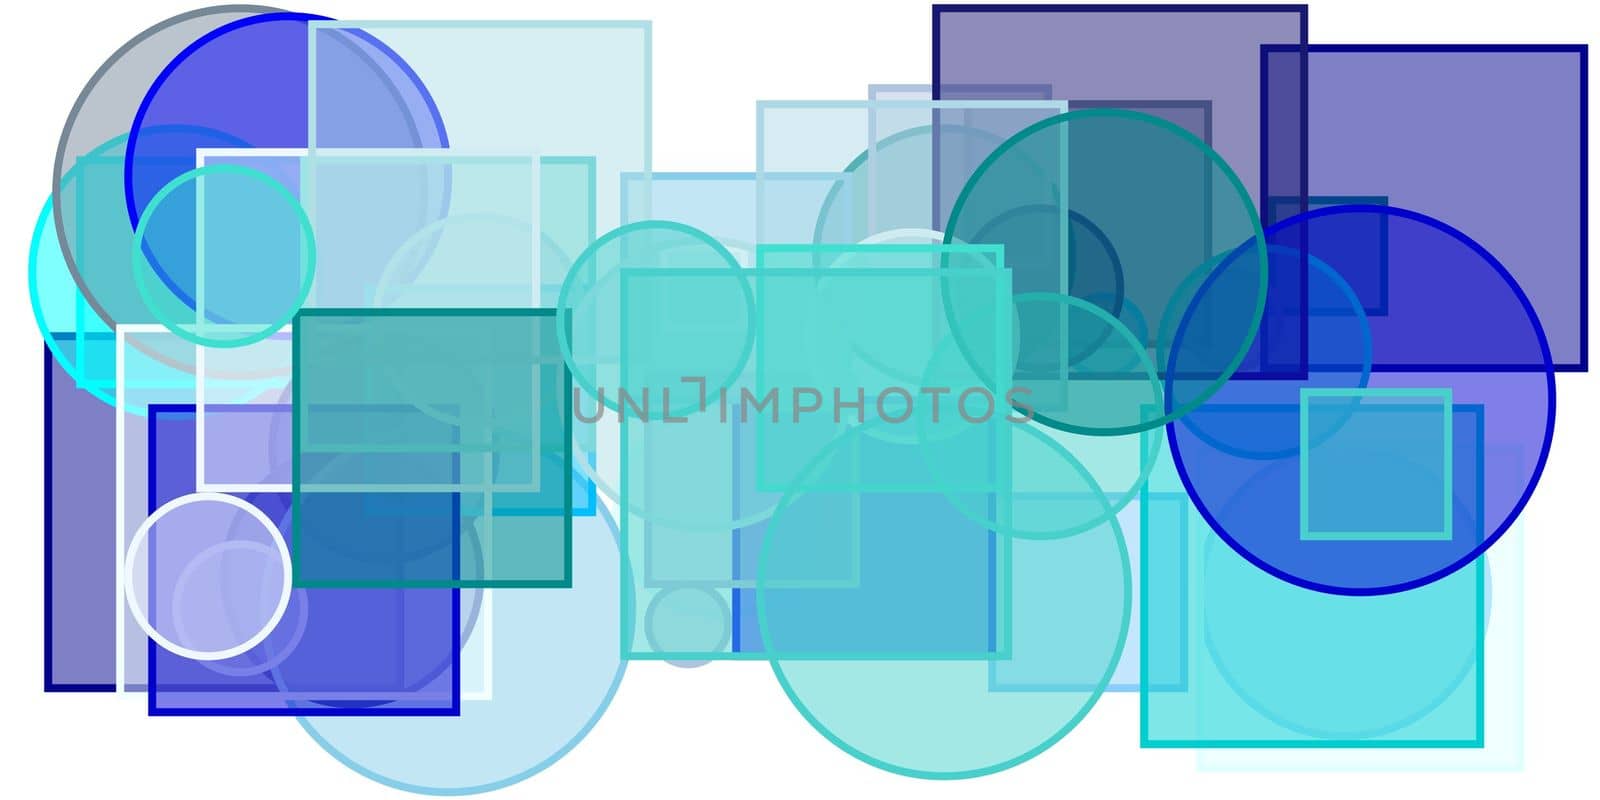 Abstract minimalist blue illustration with circles squares and white background